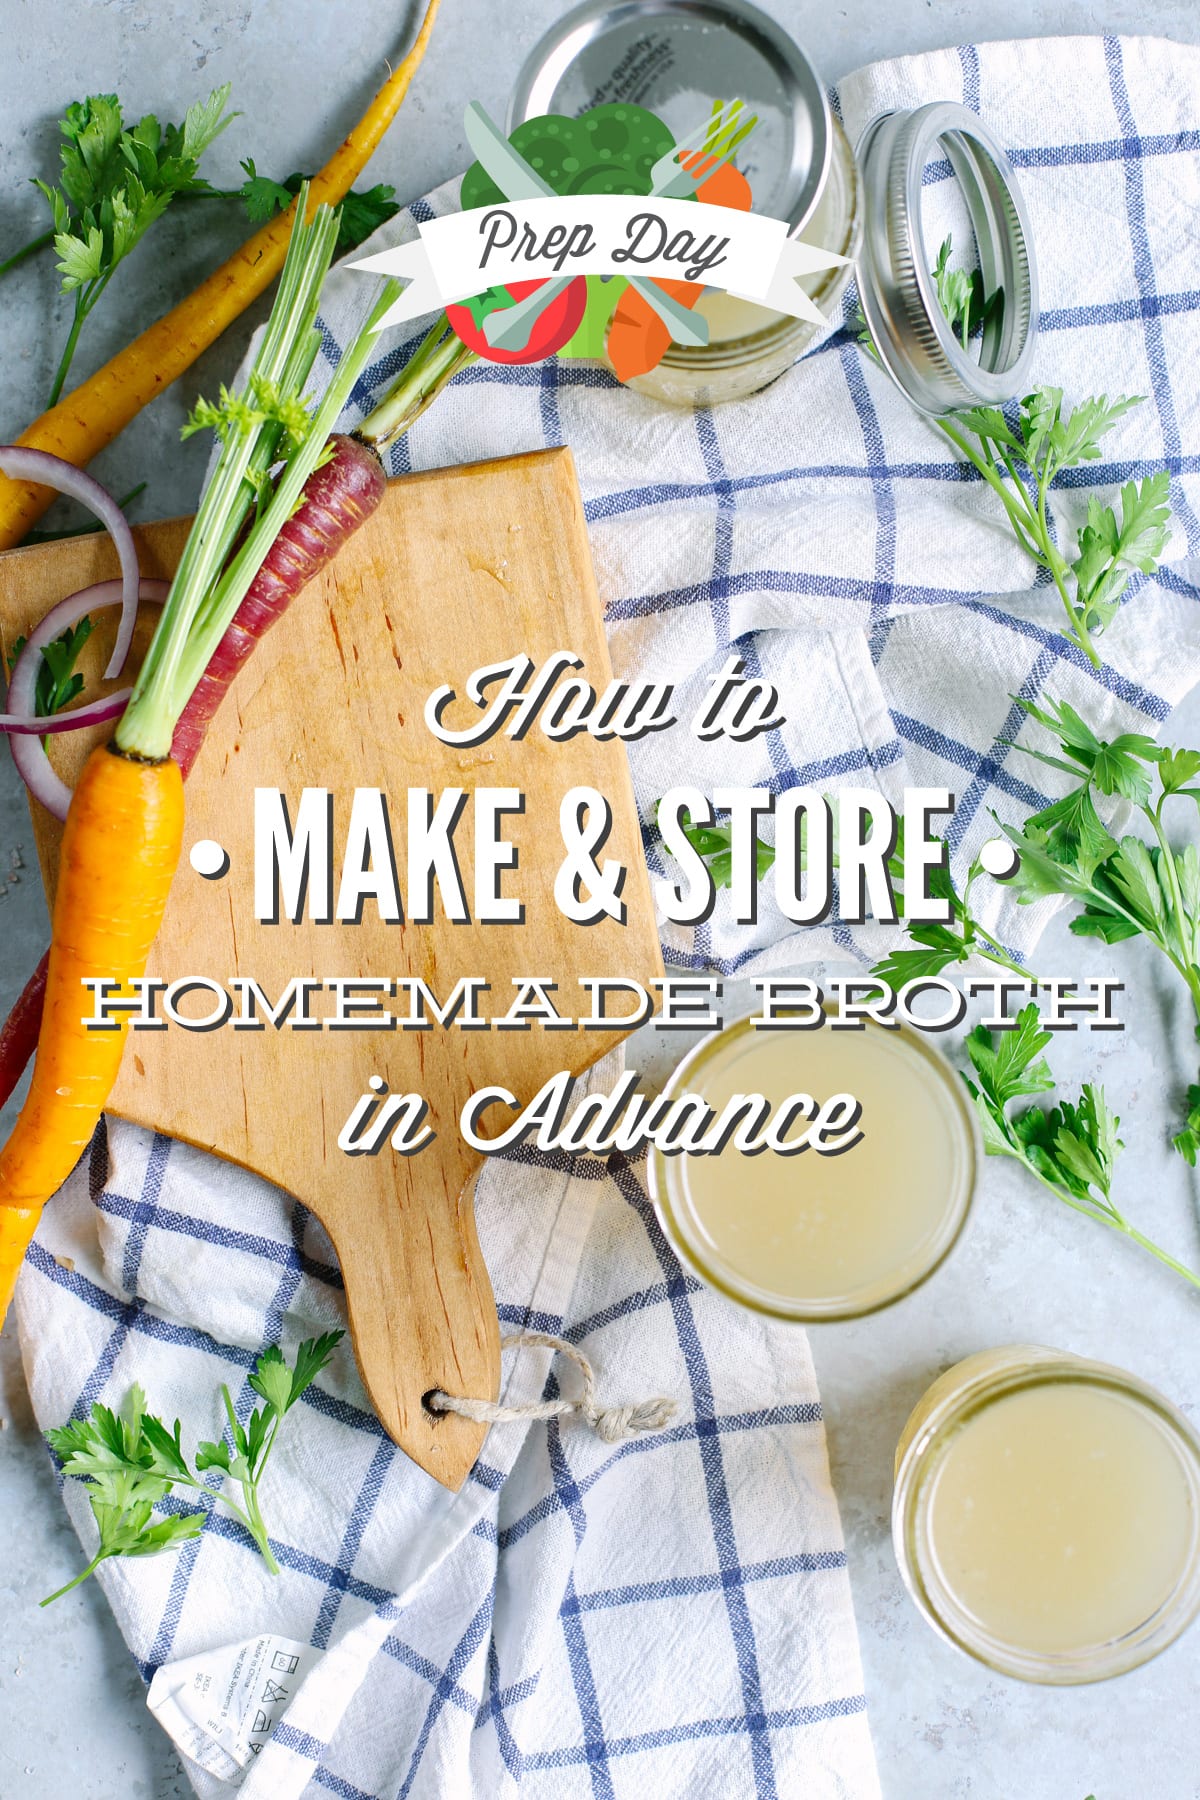 Prep Day: How to Make and Store Homemade Broth In Advance